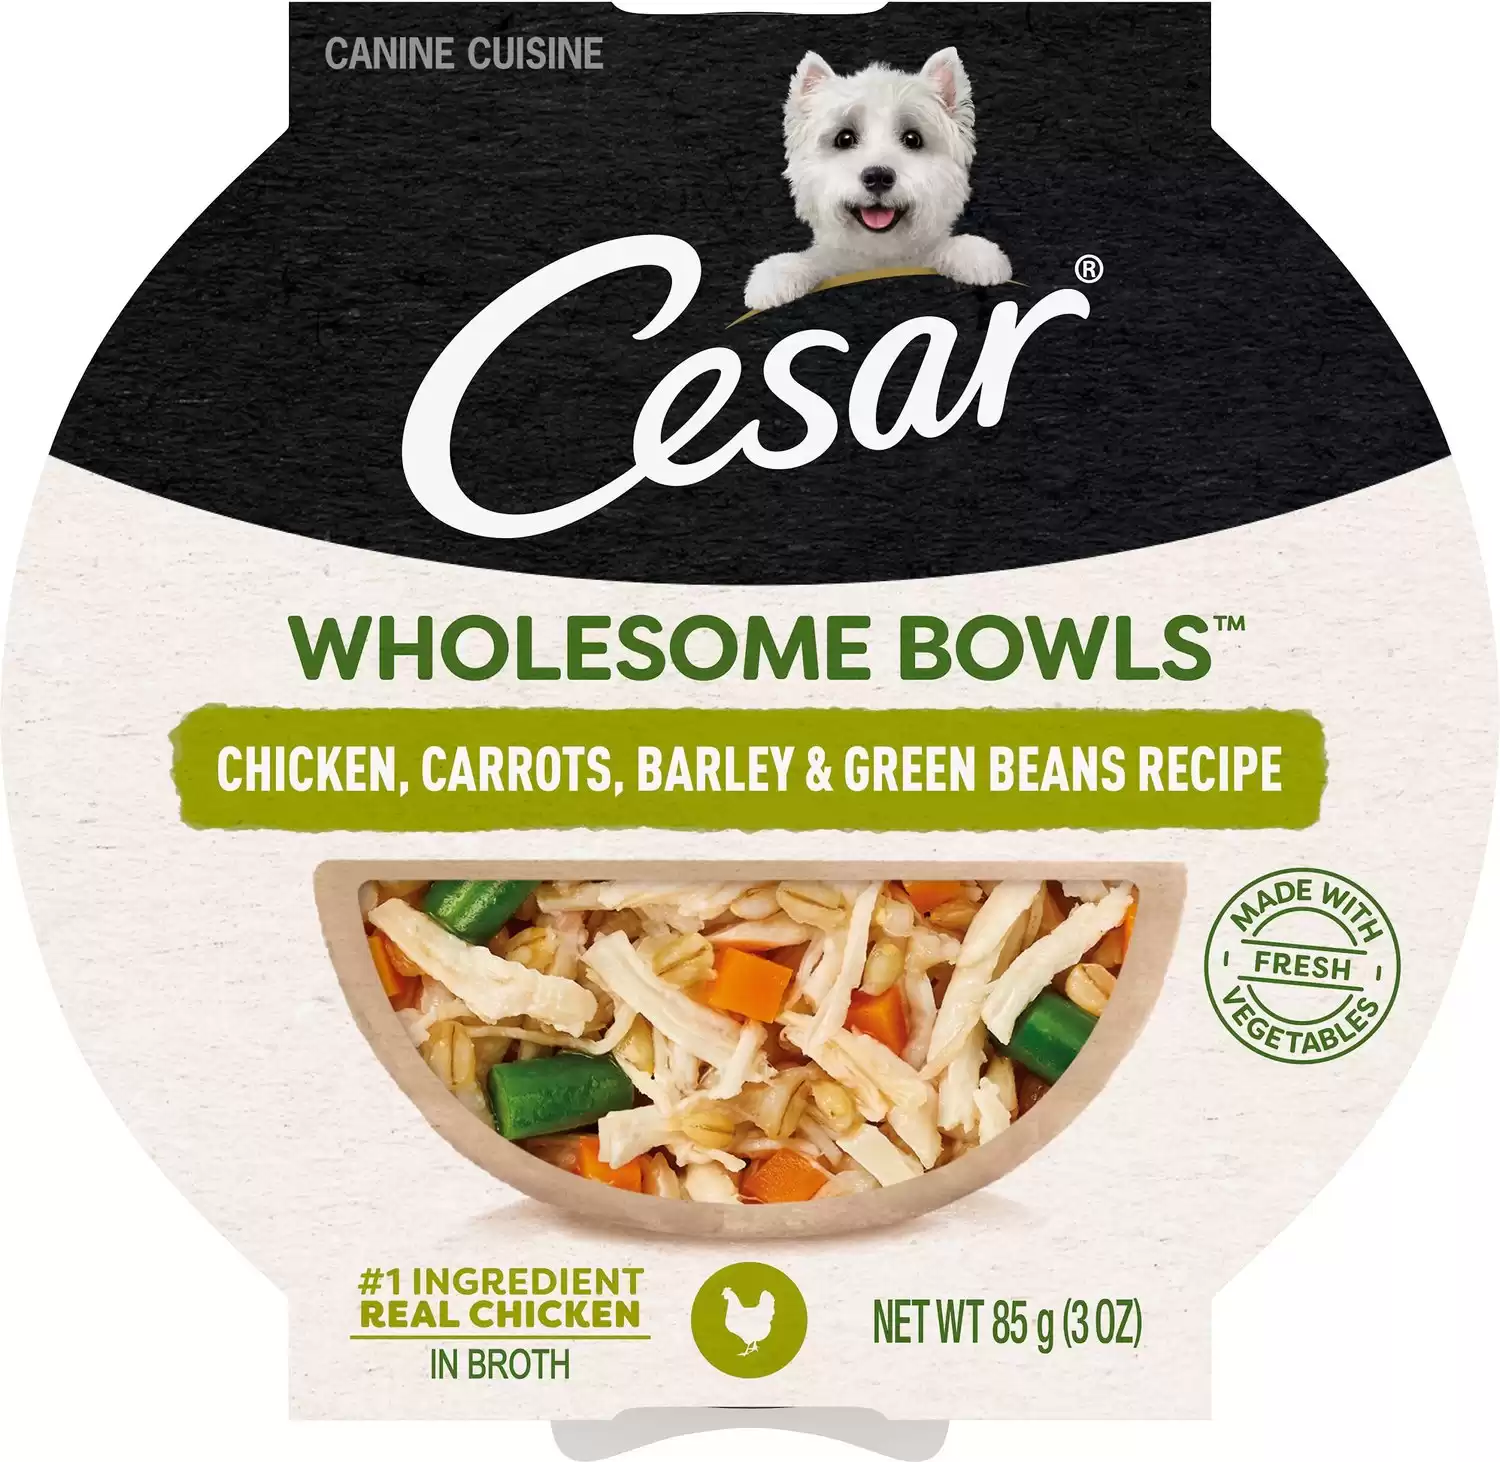 Cesar Wholesome Bowls Chicken, Carrots, Barley & Green Beans Recipe